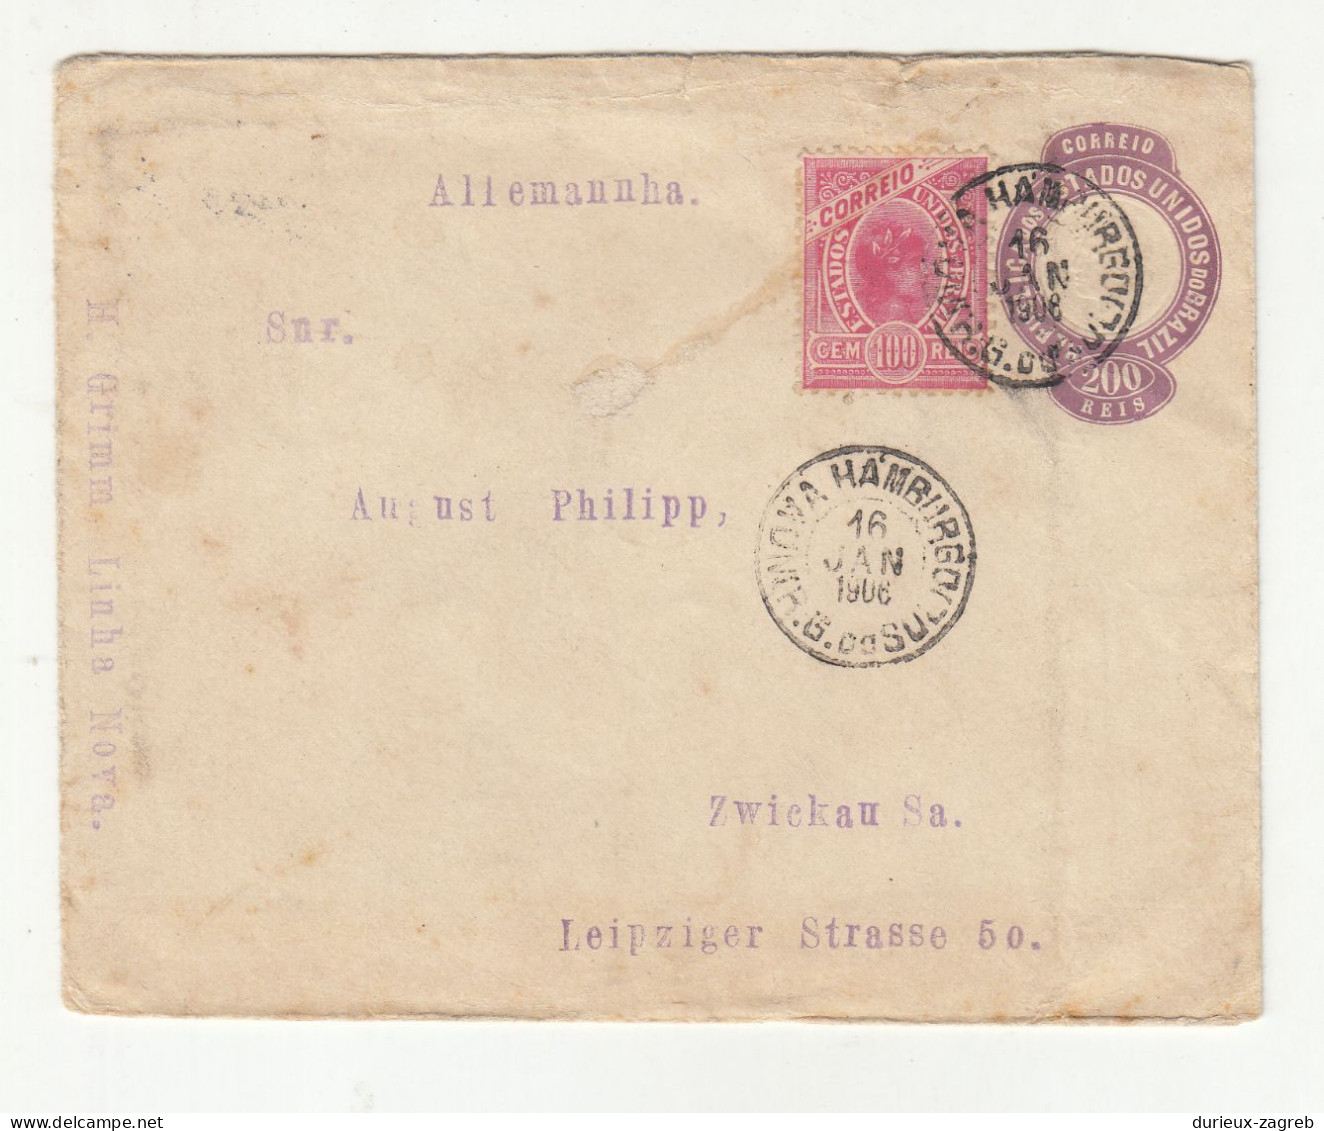 Brazil 200 Reis Postal Stationery Letter Cover Posted 1906 To Germany - Uprated B240401 - Ganzsachen